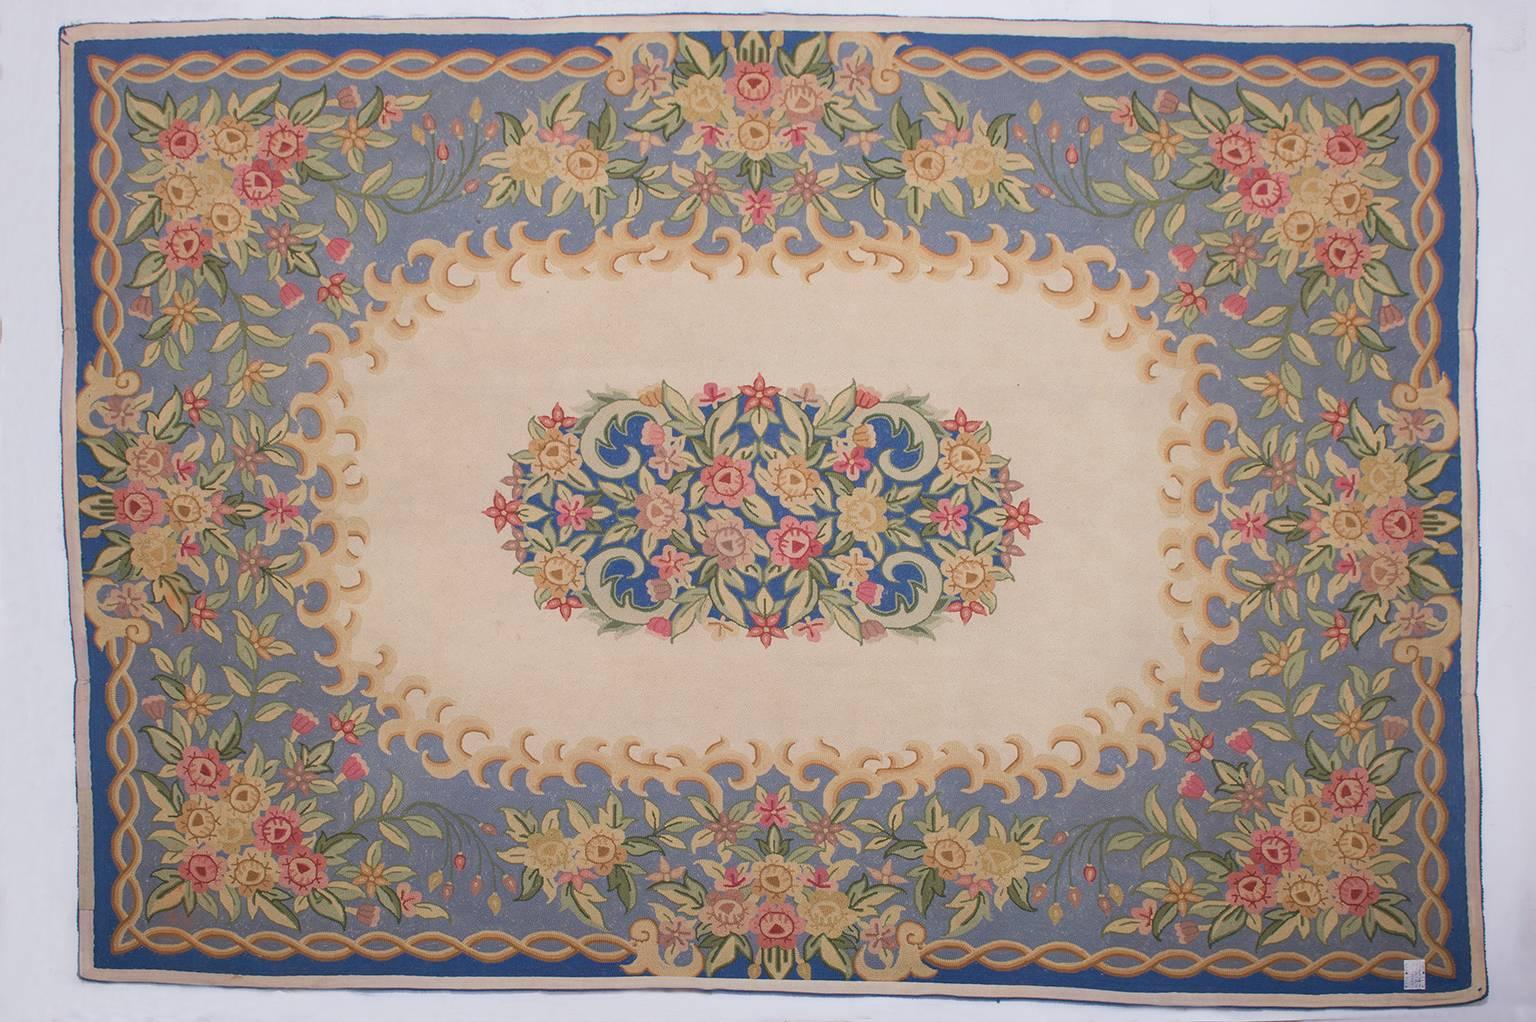 Pleasant vintage Hooked carpet with Aubusson design: unbelievable price for clearance sale !!
nr. 592 -